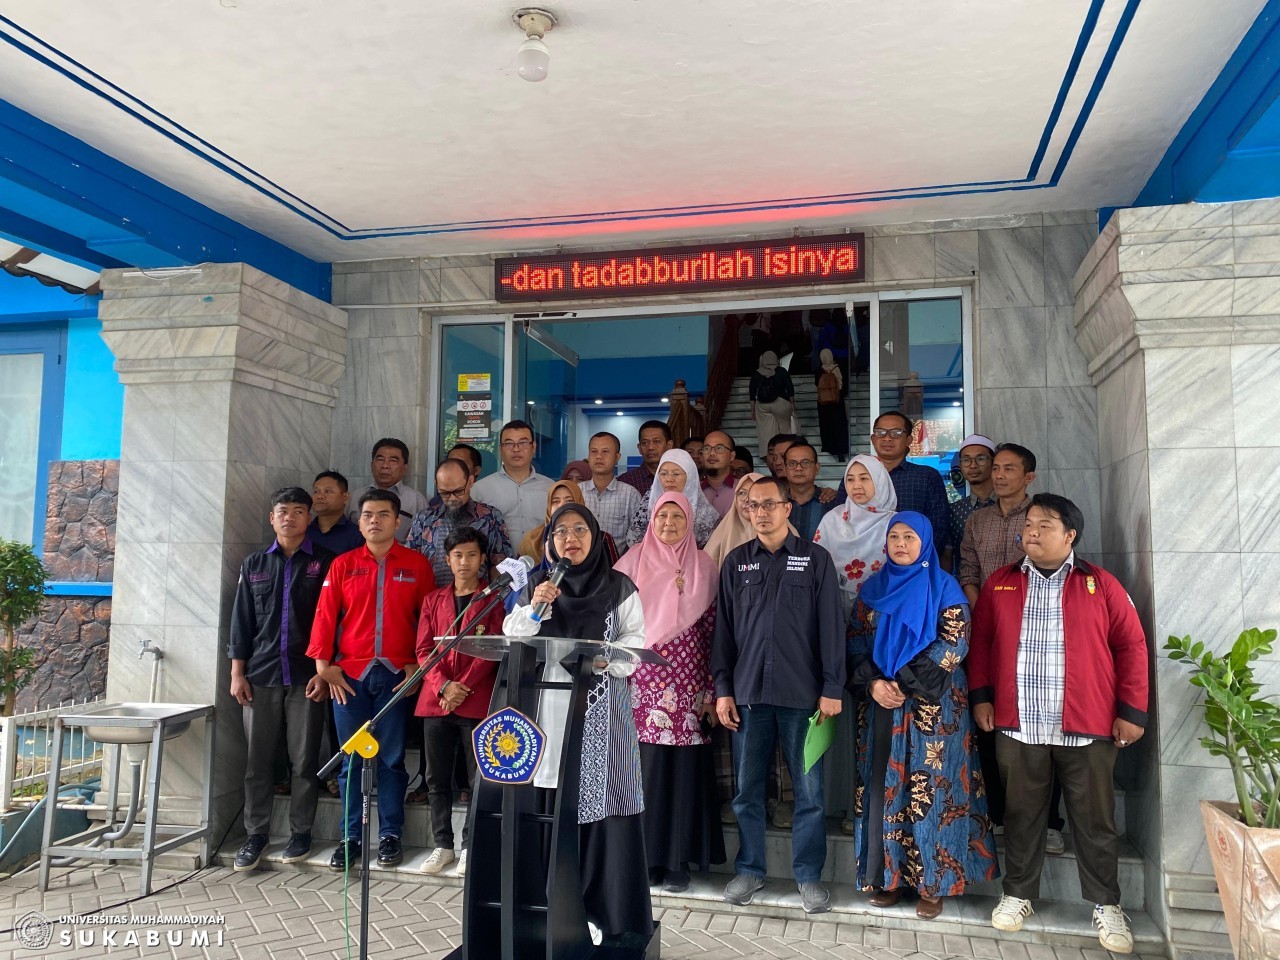 Ahead of the 2024 General Election, Universitas Muhammadiyah Sukabumi Advocates for Honest, Fair, and Dignified Elections